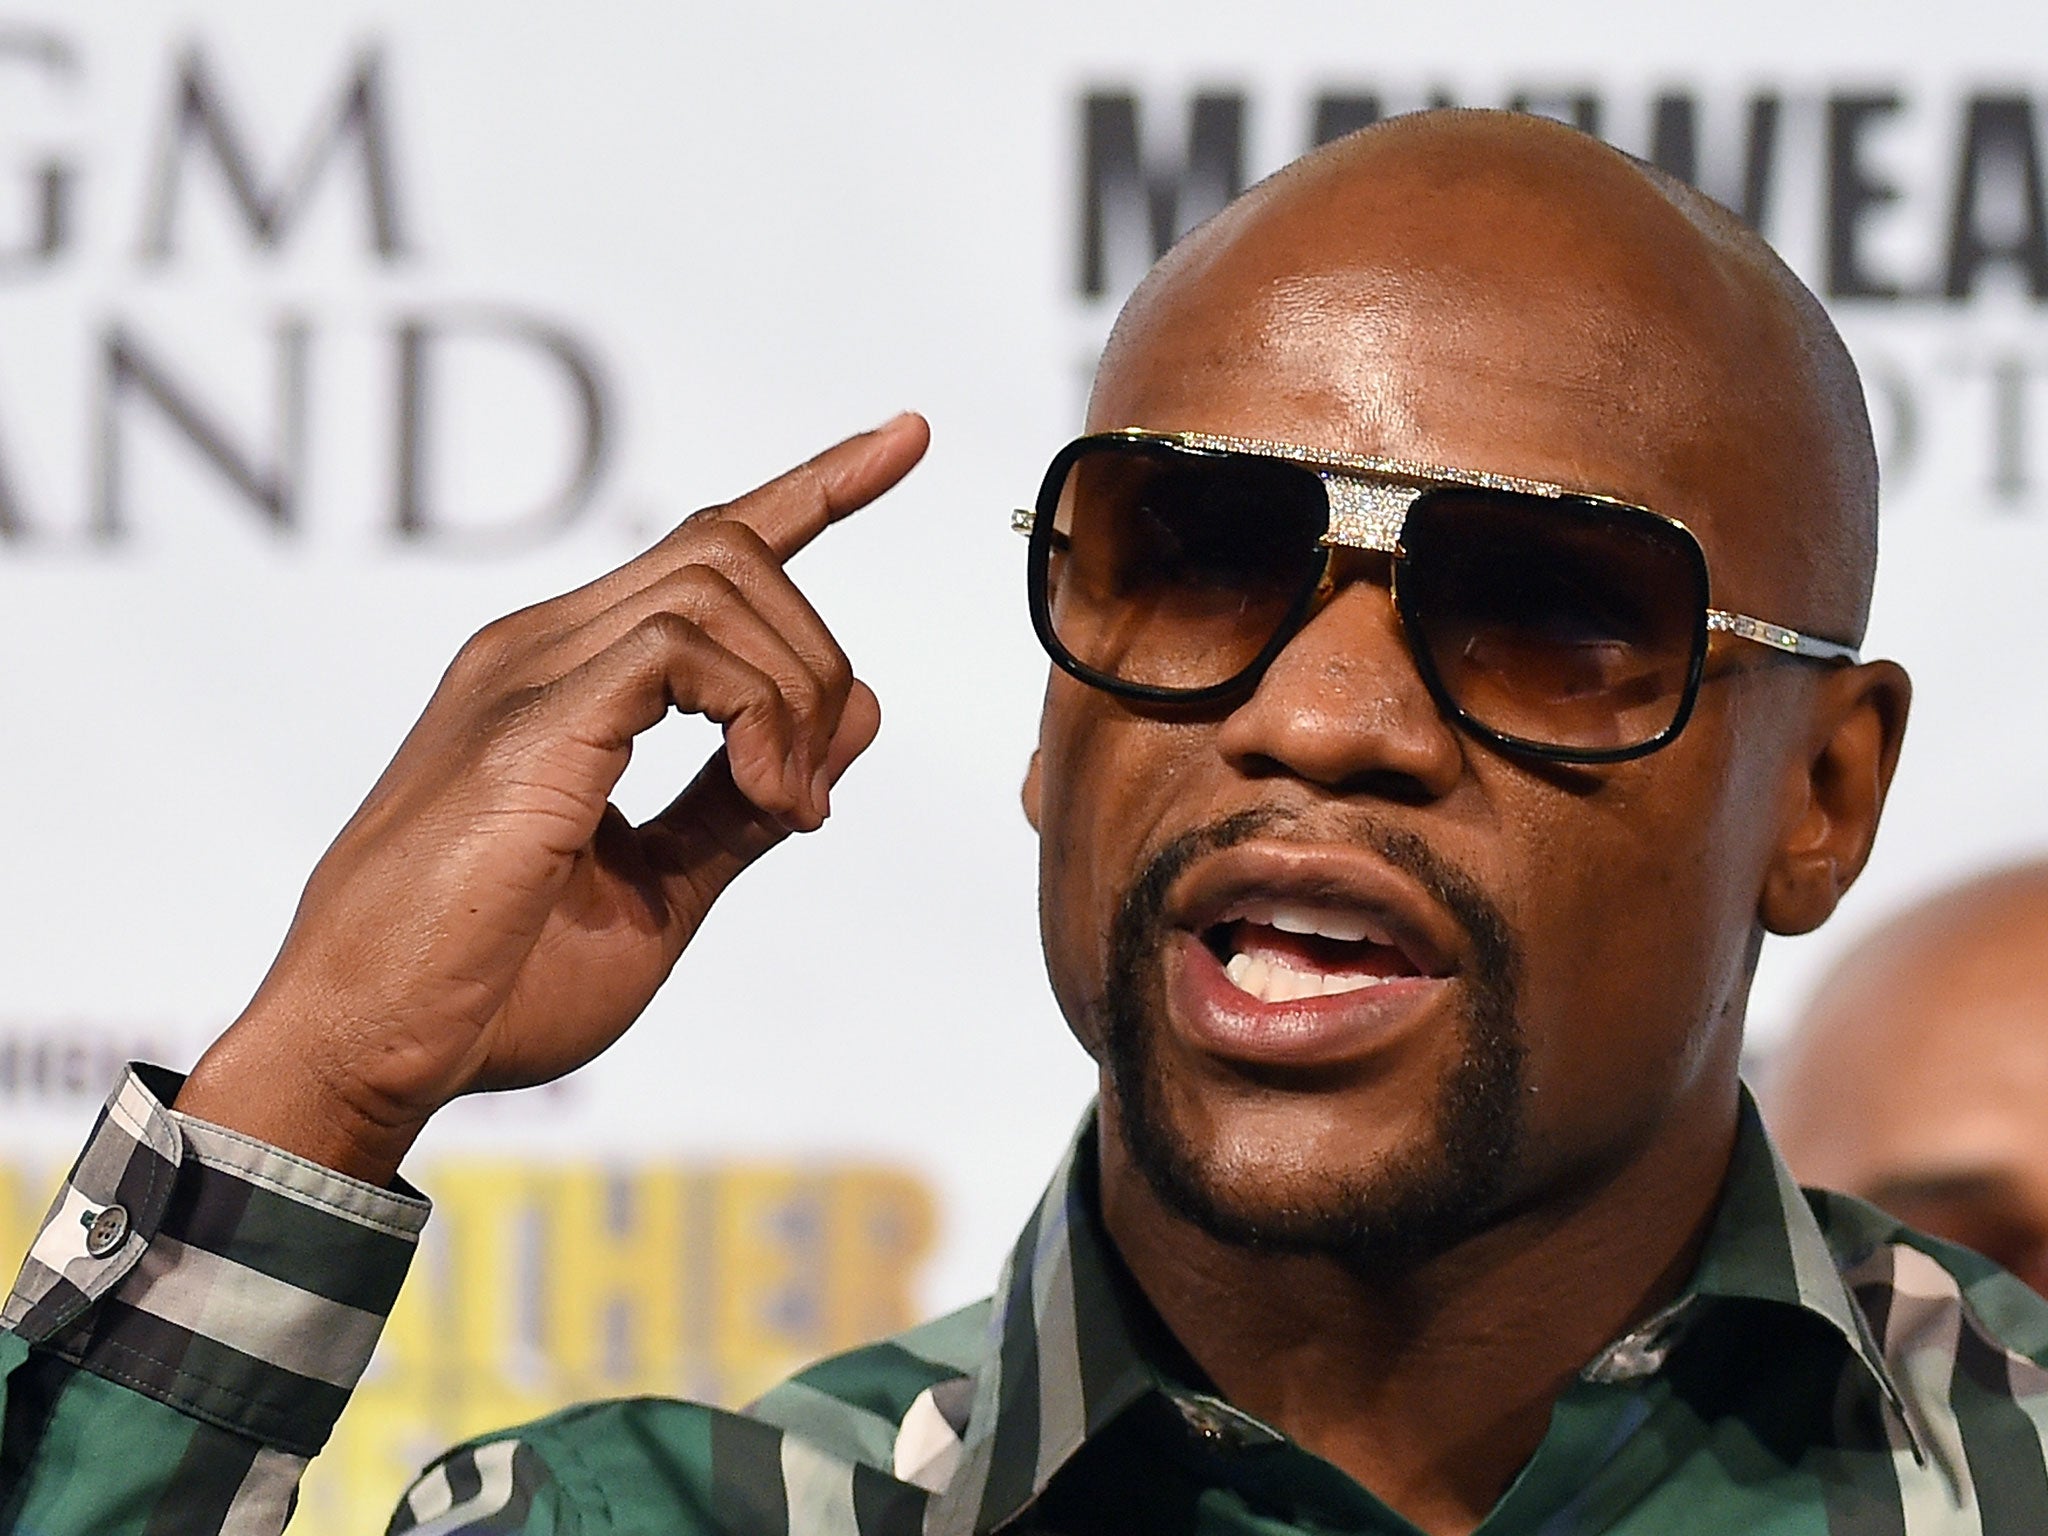 Floyd Mayweather will face Andre Berto